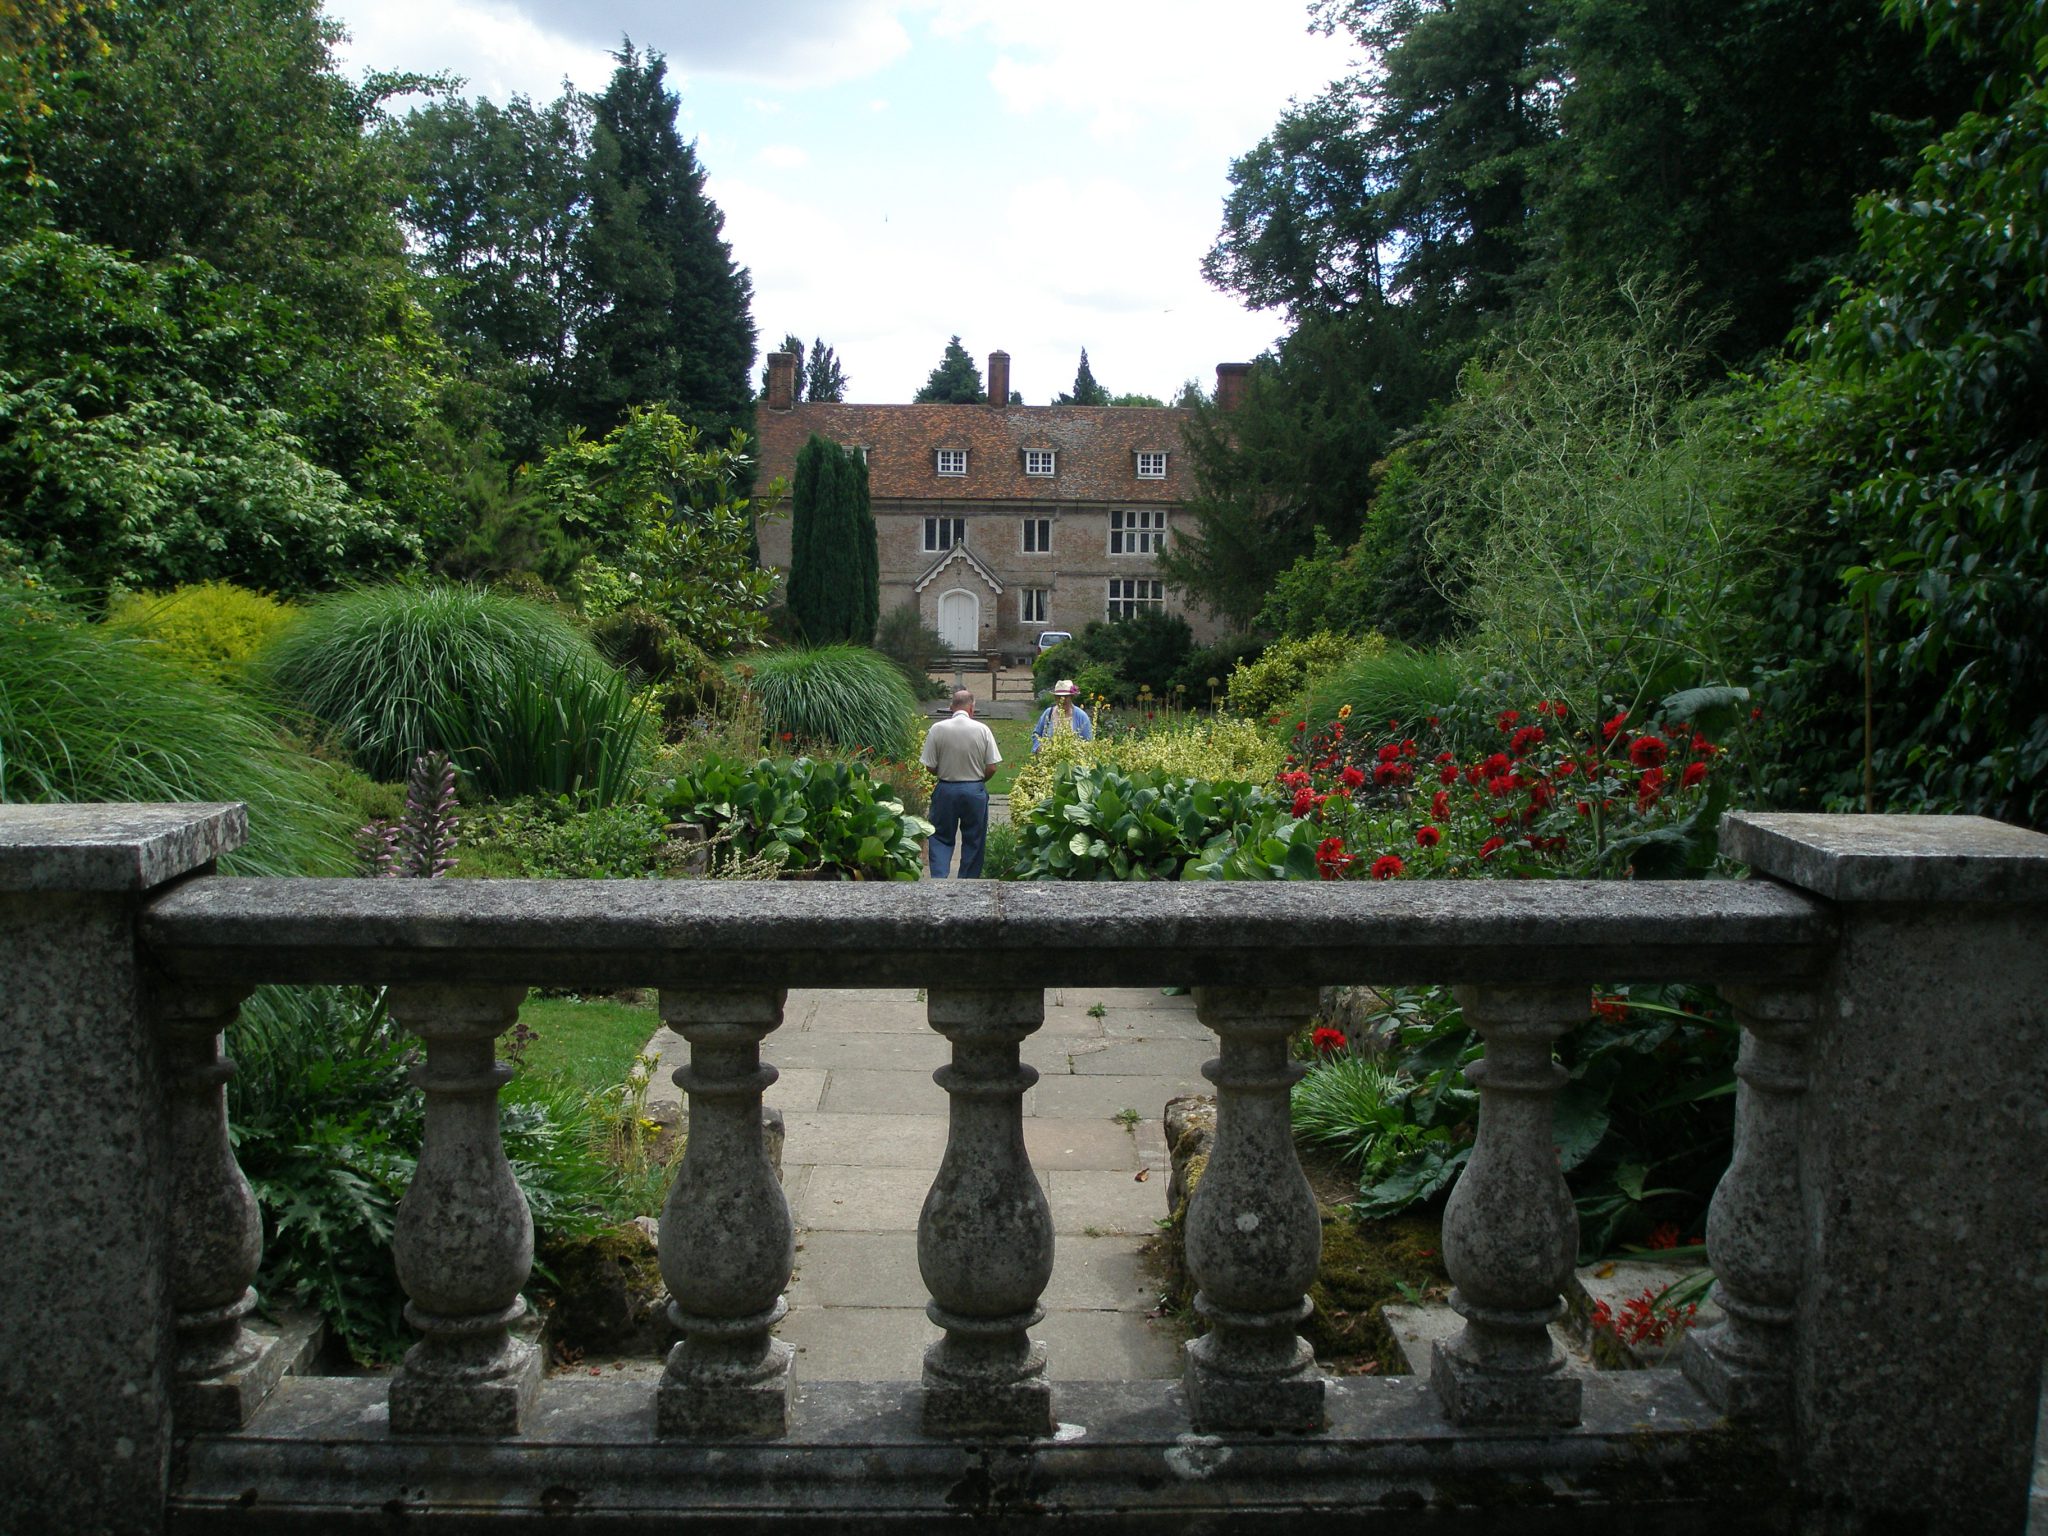 The front of the House, seen from the Top Terrace, which the Camerons planted in 1970.